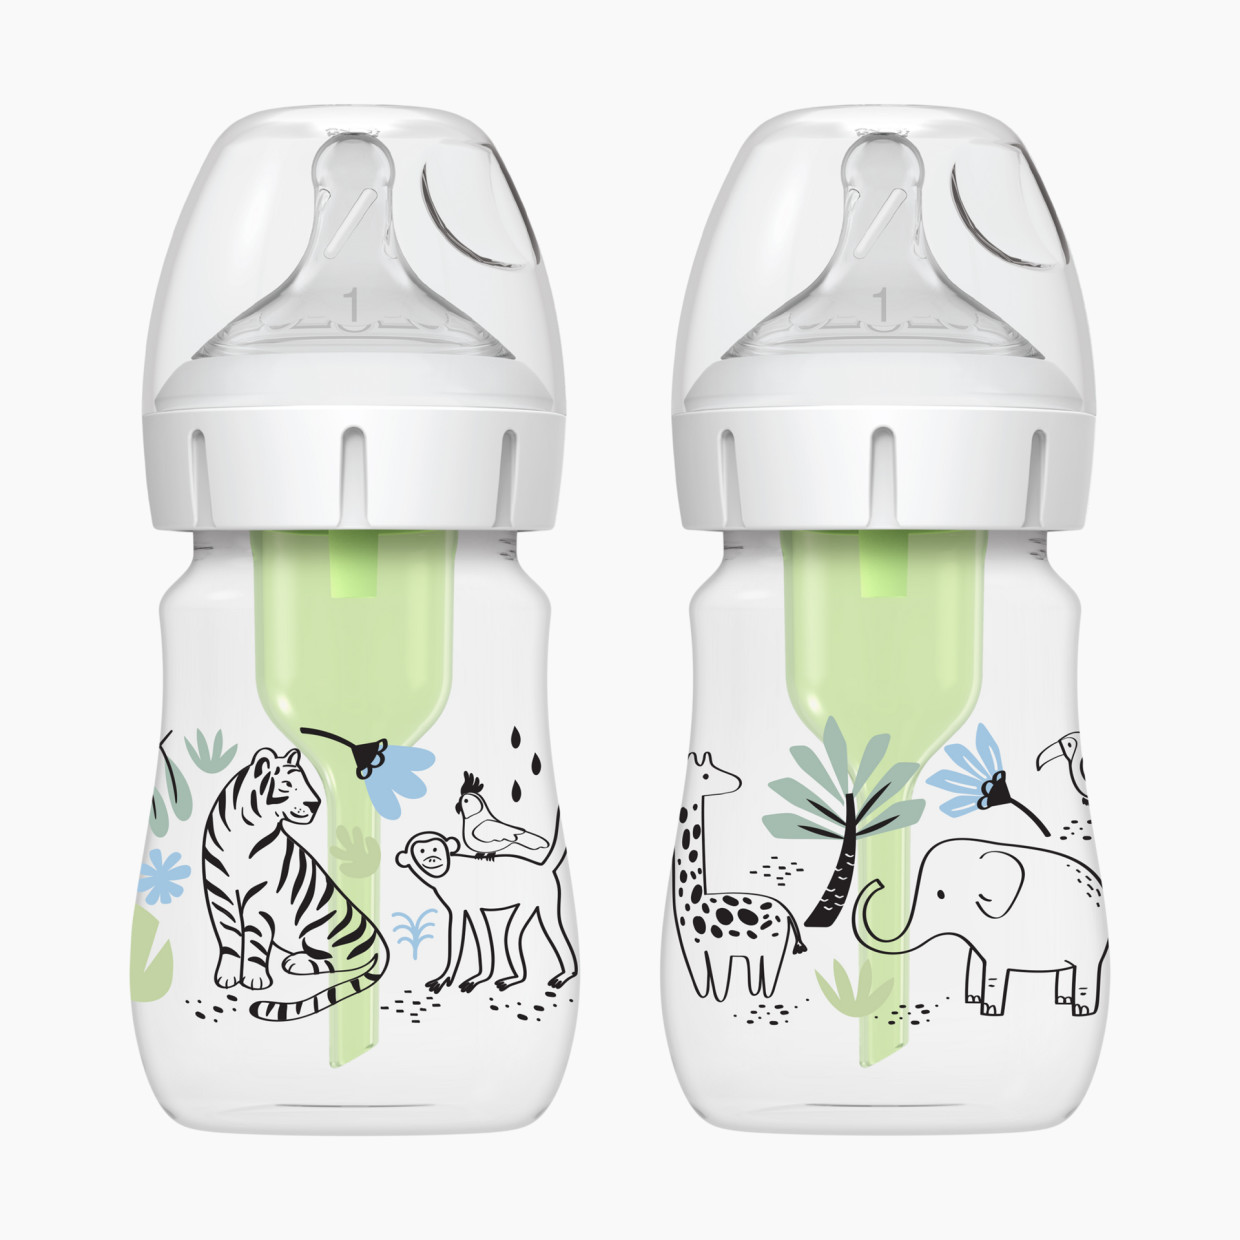 Spectra Anti-Colic Slow Flow Bottle Nipples 2 Pack